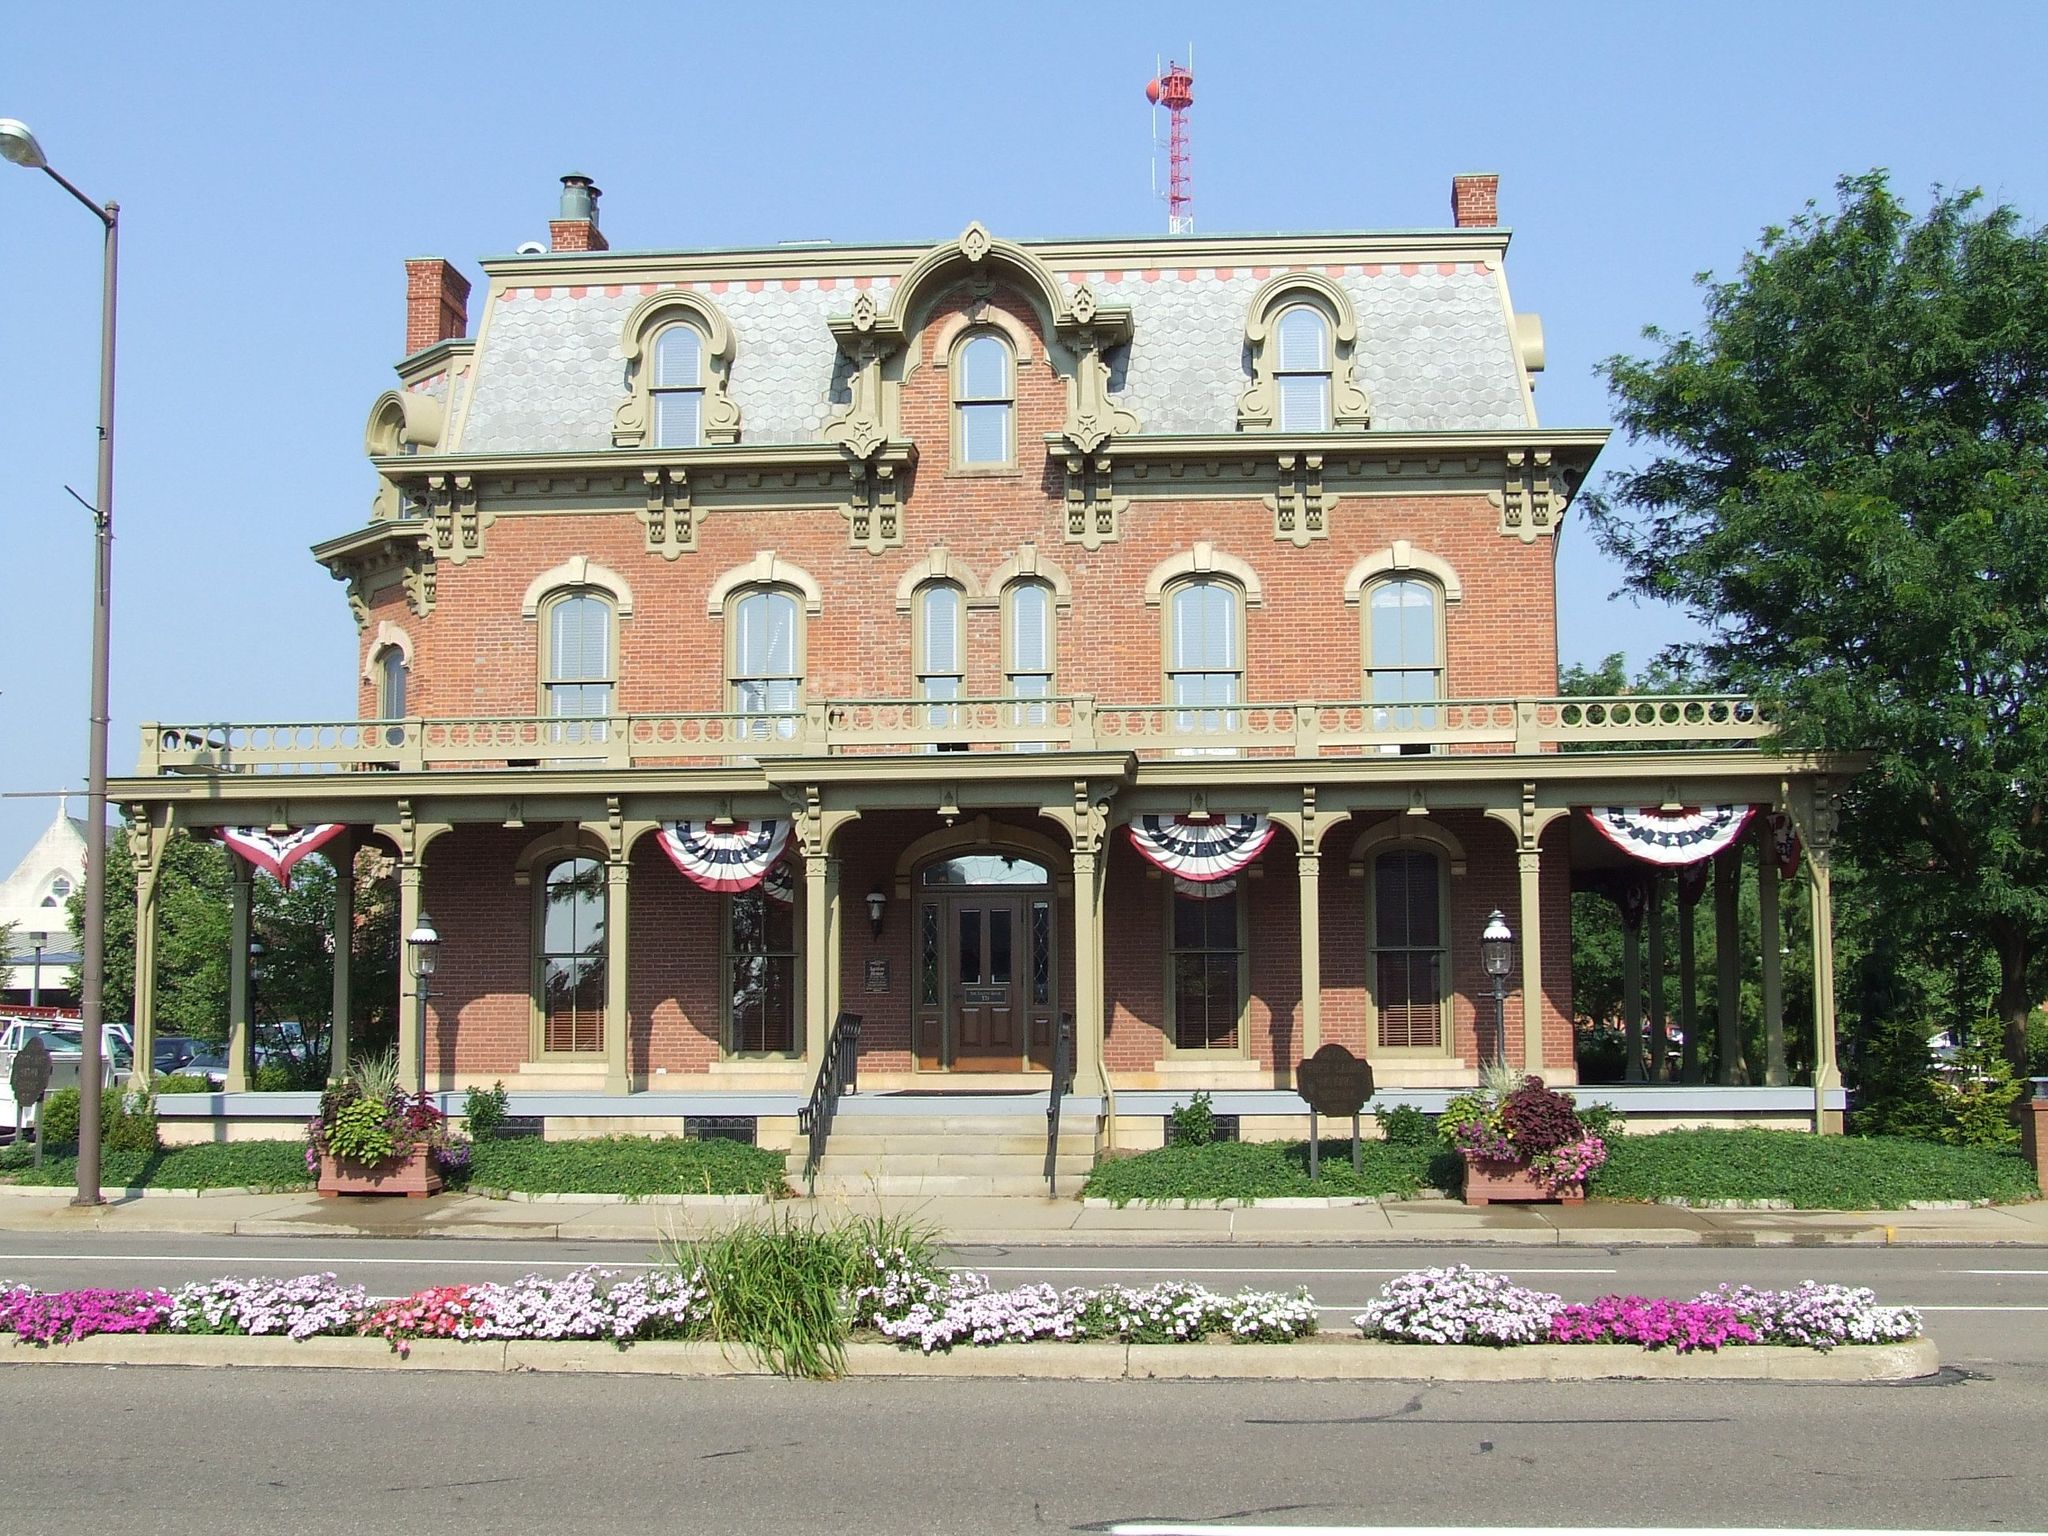 This was the longtime residence of William and Ida McKinley.